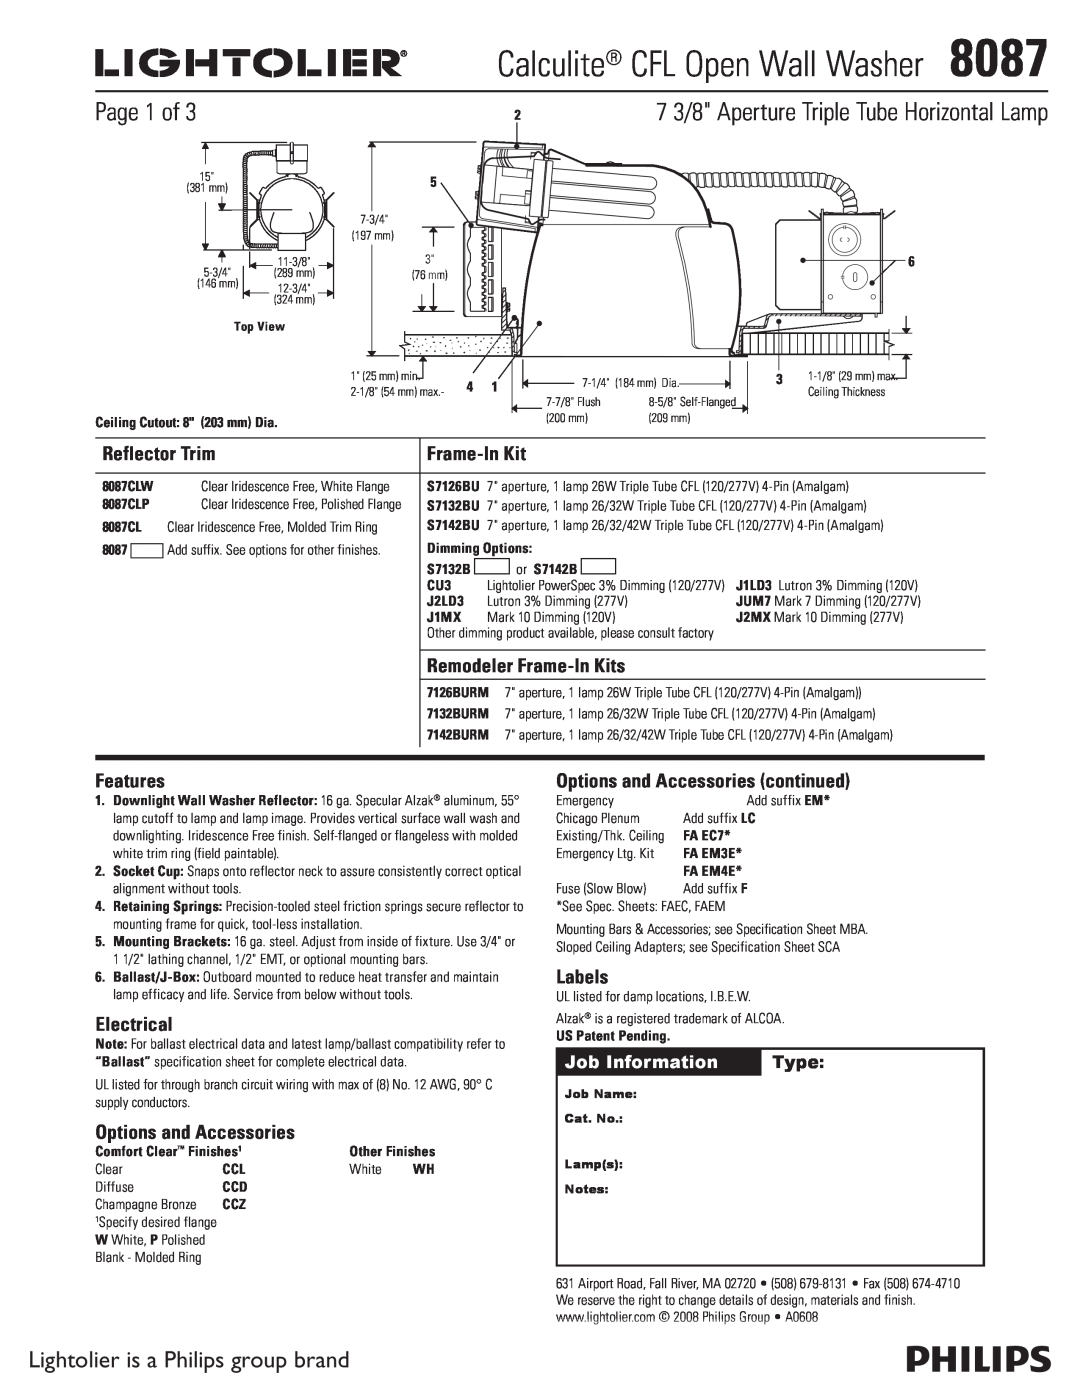 Lightolier 8087 specifications Page 1 of, Lightolier is a Philips group brand, 7 3/8 Aperture Triple Tube Horizontal Lamp 